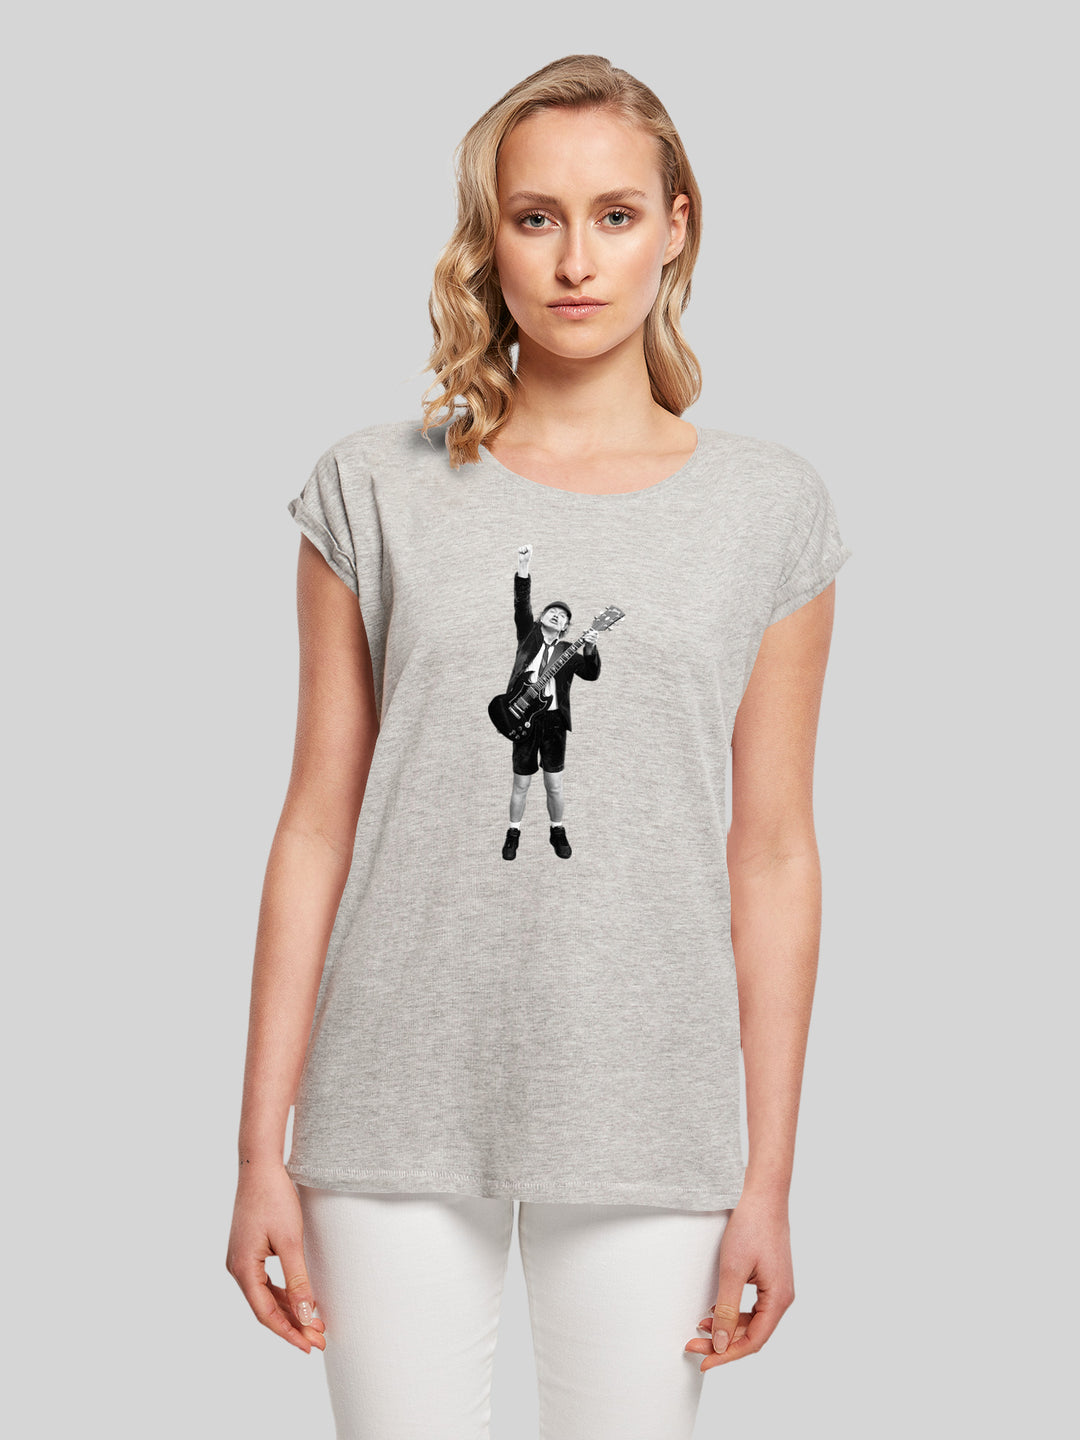 ACDC T-Shirt | Angus Young Cut Out | Premium Short Sleeve Ladies Tee